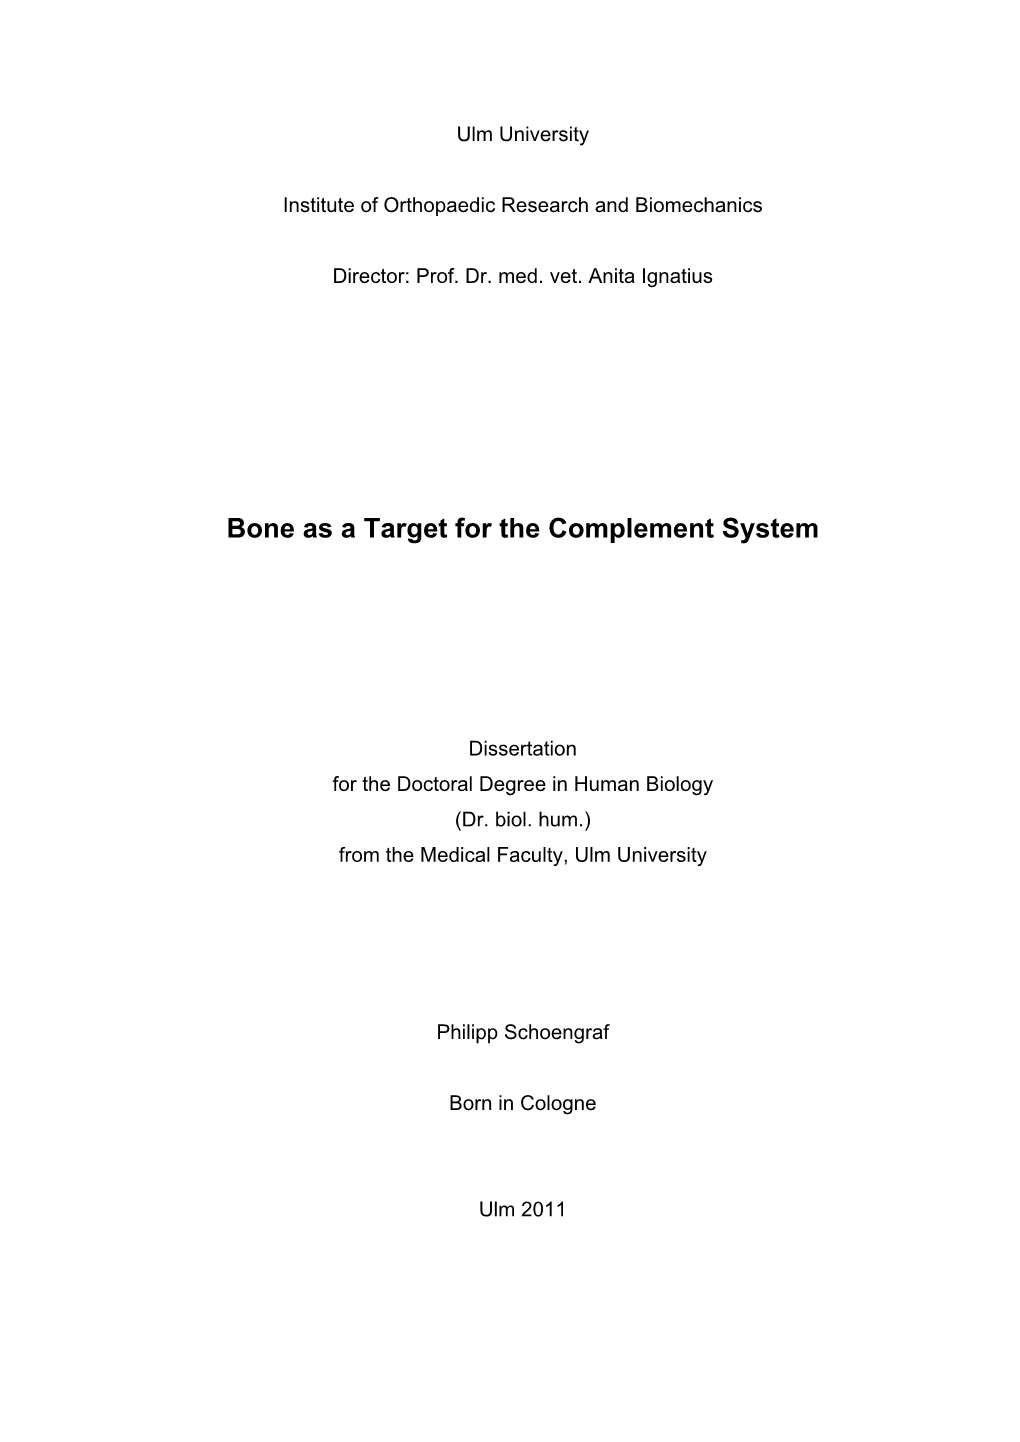 Bone As a Target for the Complement System